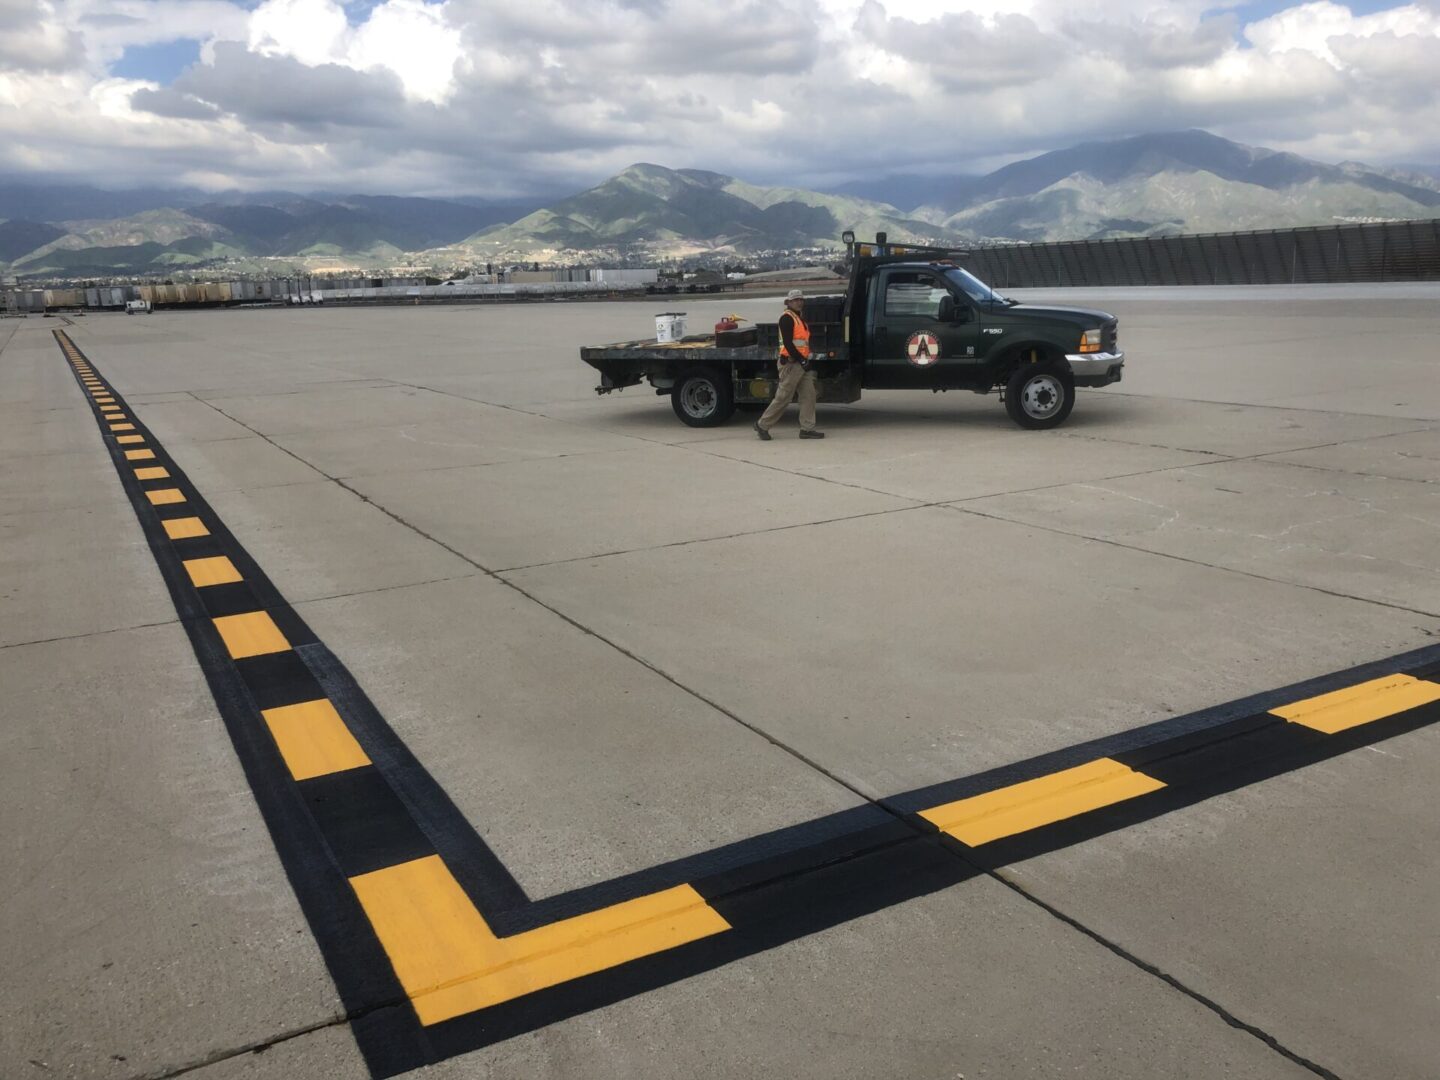 Yellow and black markings on a wide concrete field